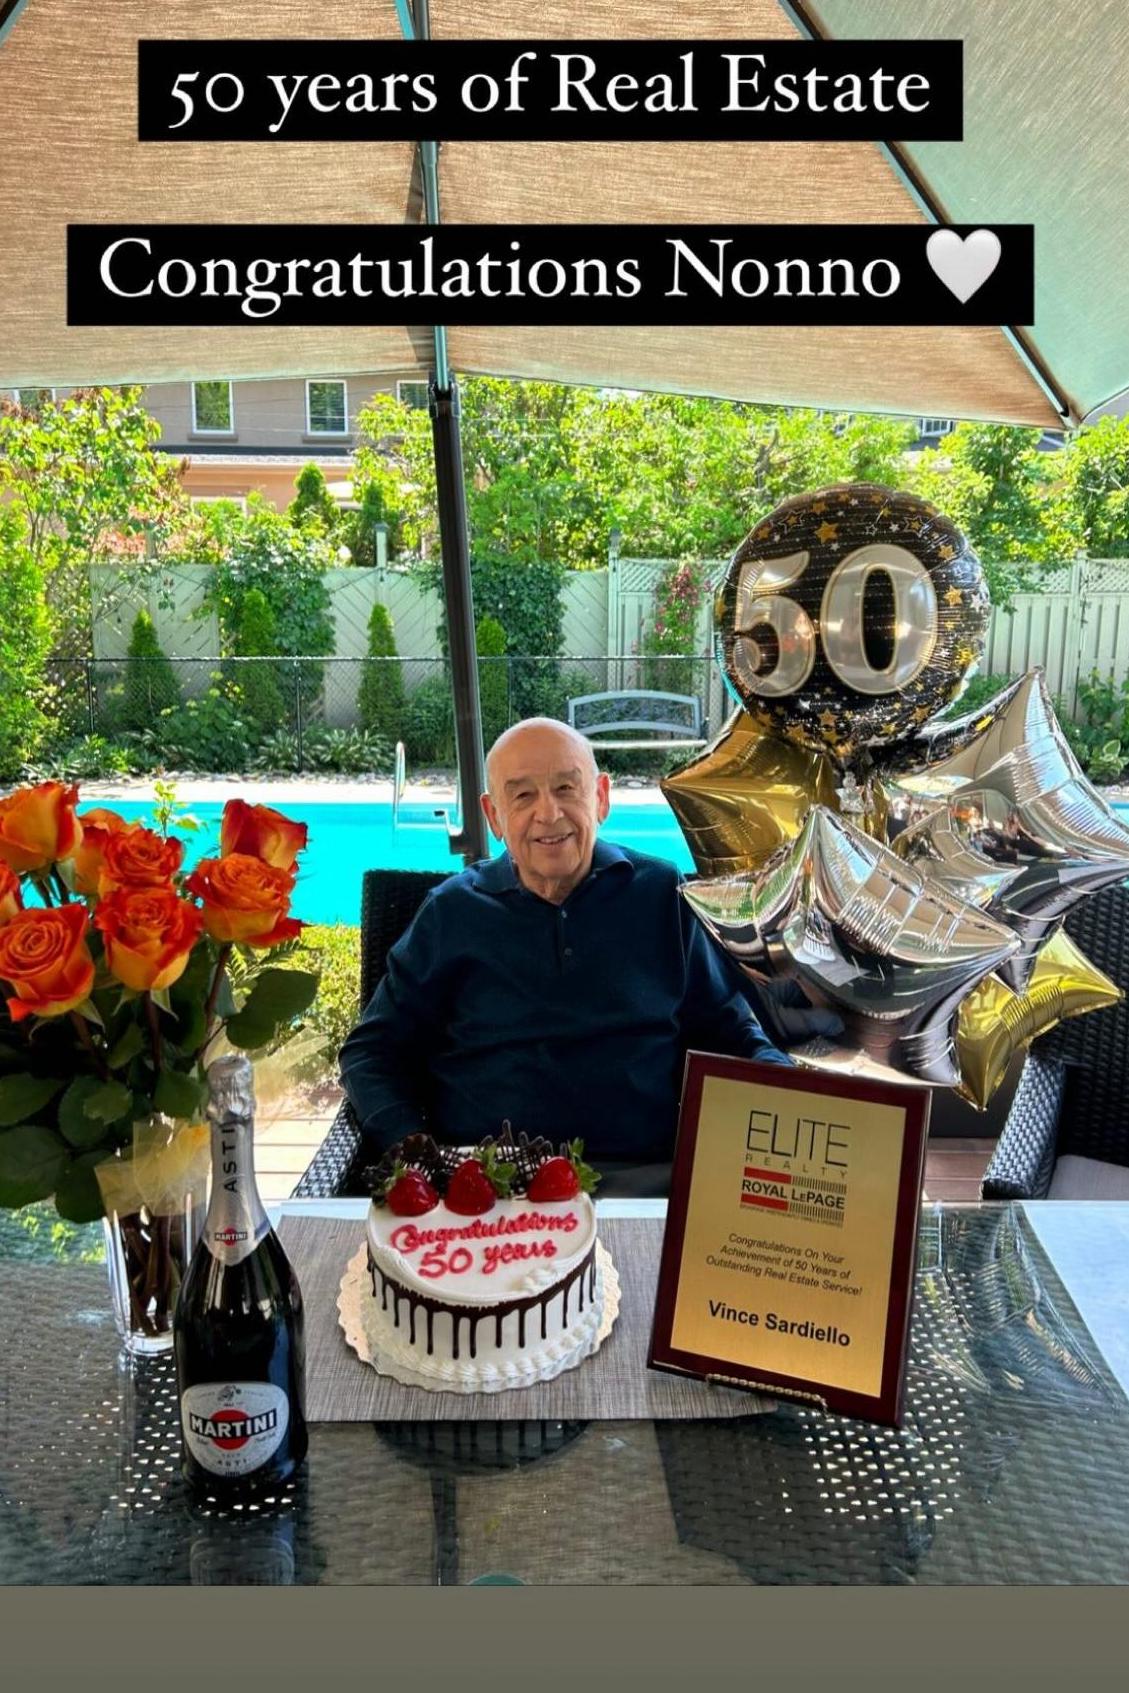 ROYAL LEPAGE ELITE REALTY CONGRATULATES VINCE SARDIELLO ON HIS 50 YEARS OF BEING IN REAL ESTATE!